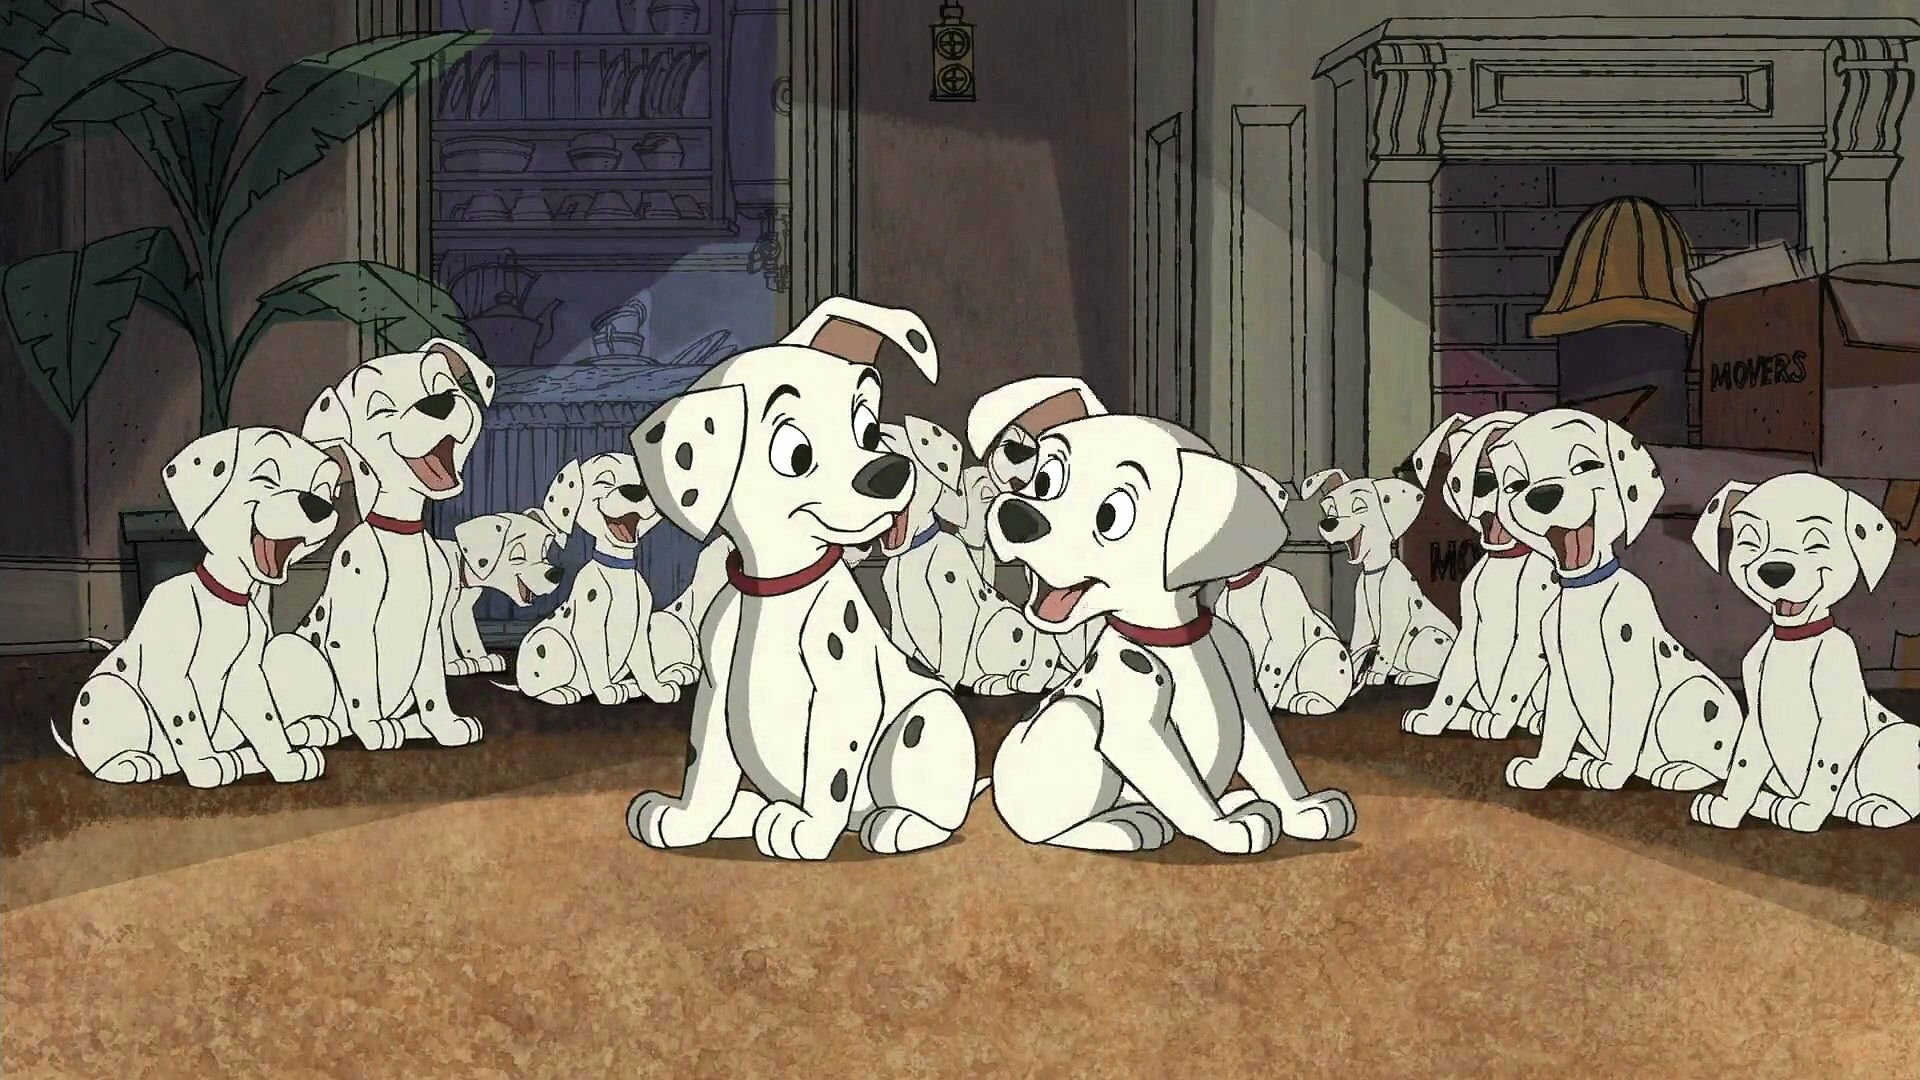 One Hundred and One Dalmatians: Comedy, Adventure, Family movie, Dogs, Puppies, Disney production. 1920x1080 Full HD Wallpaper.